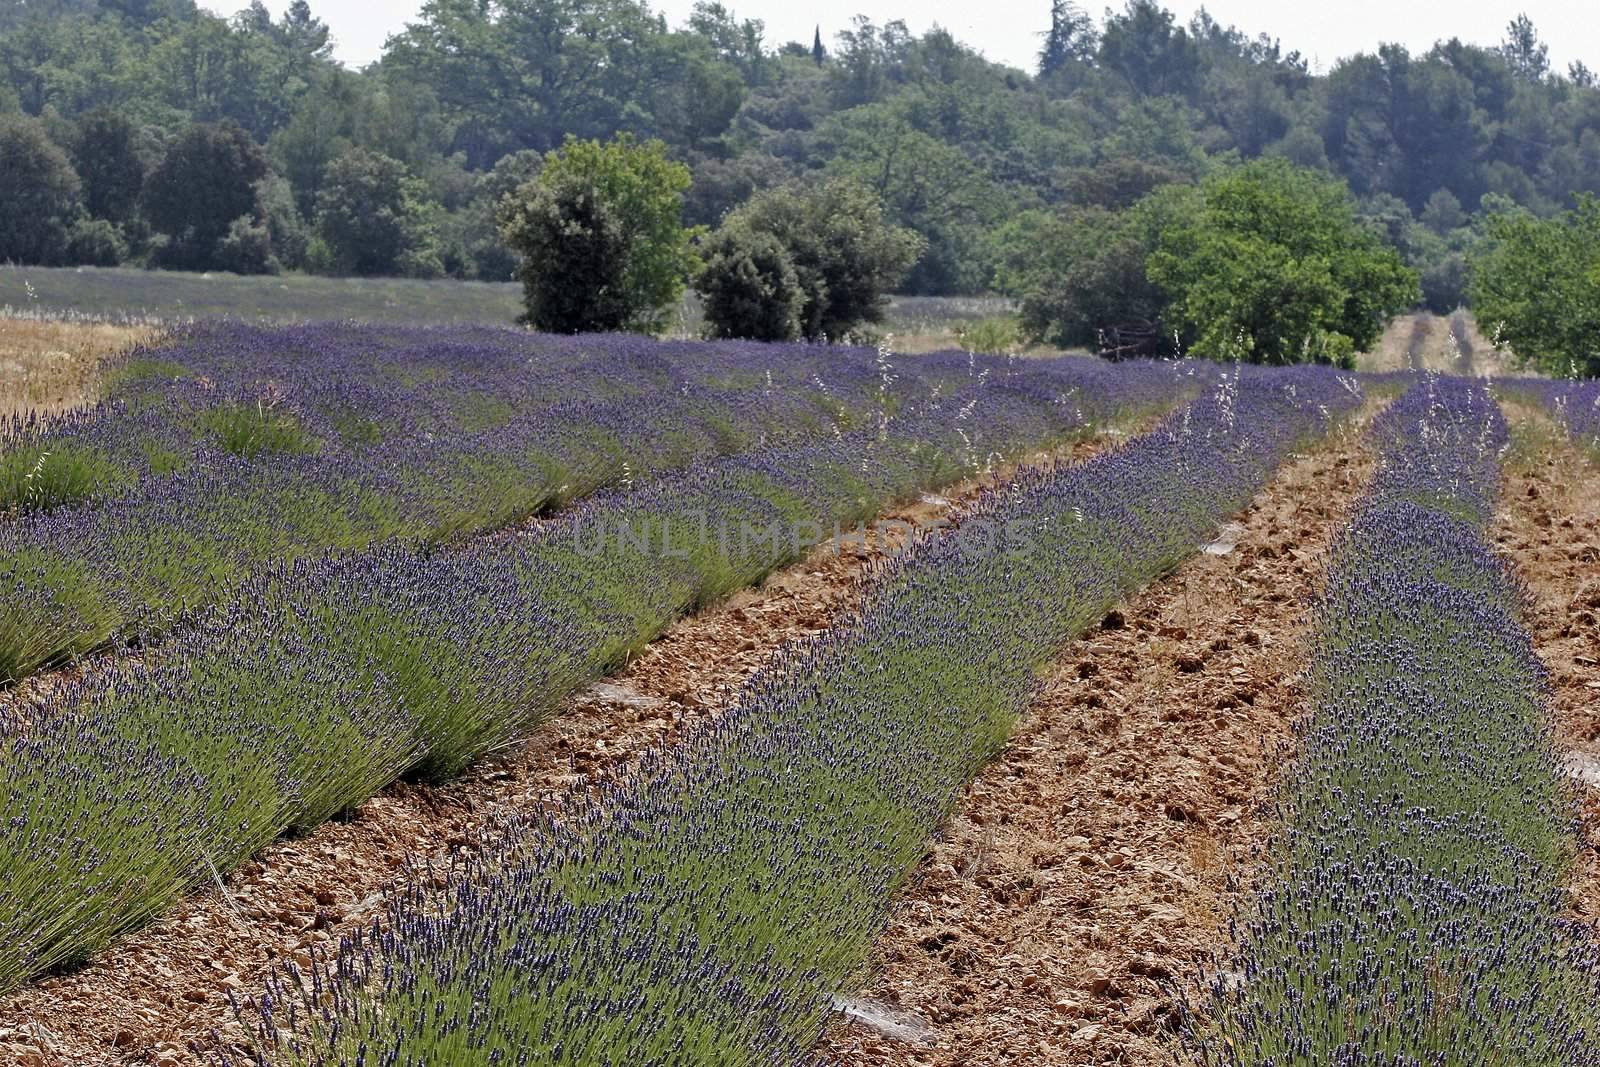 Lavender fields in the Provence by Natureandmore